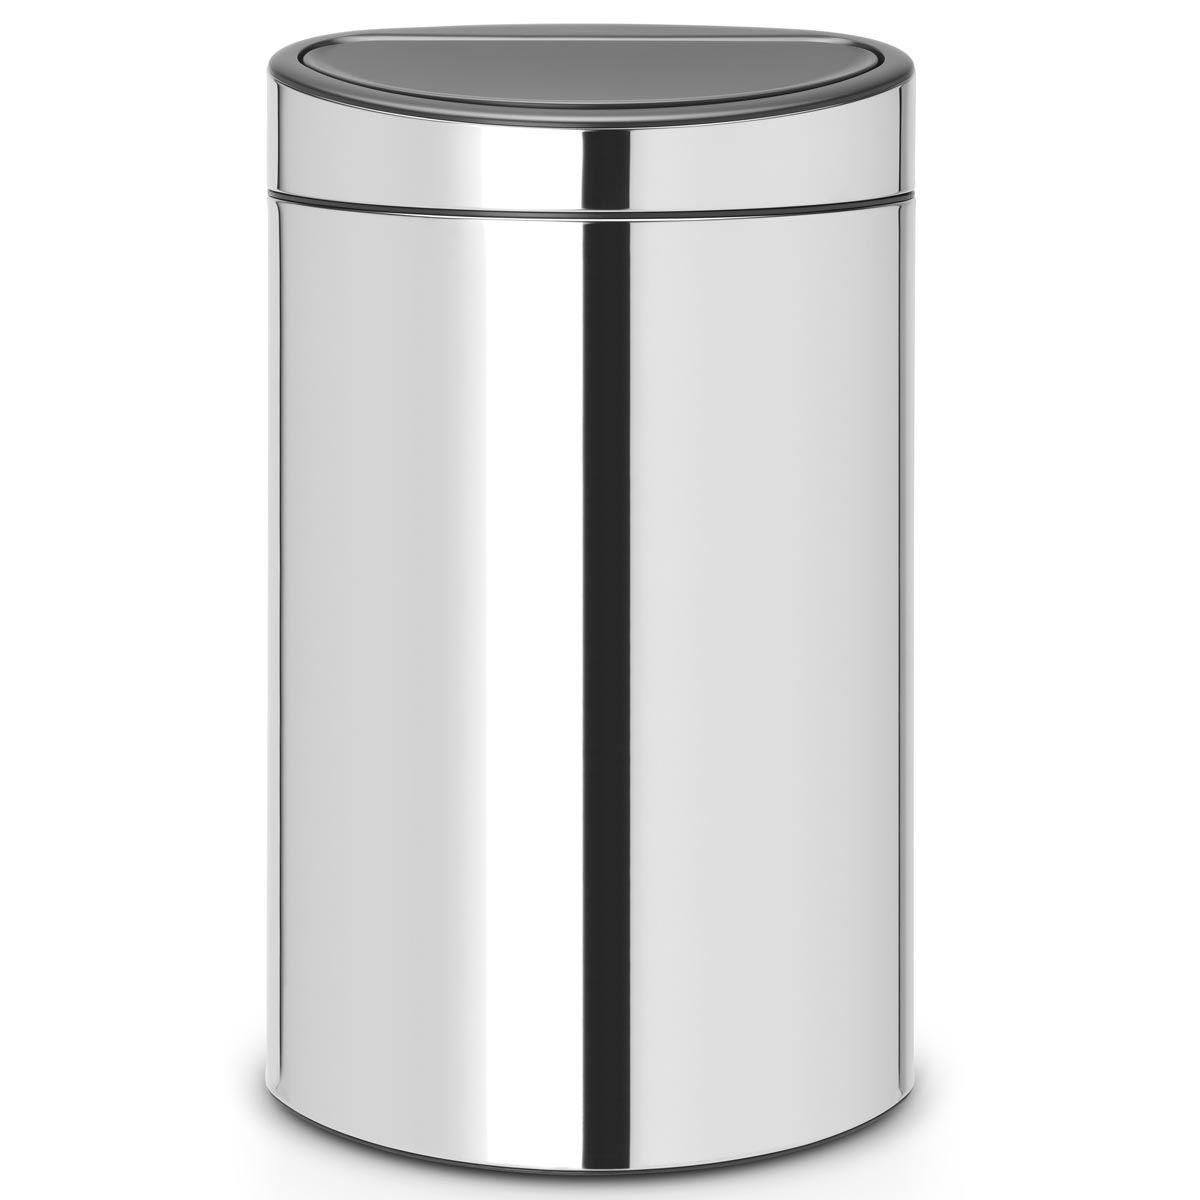 Beige looks cream and what is the black square on the front of this bin colour?